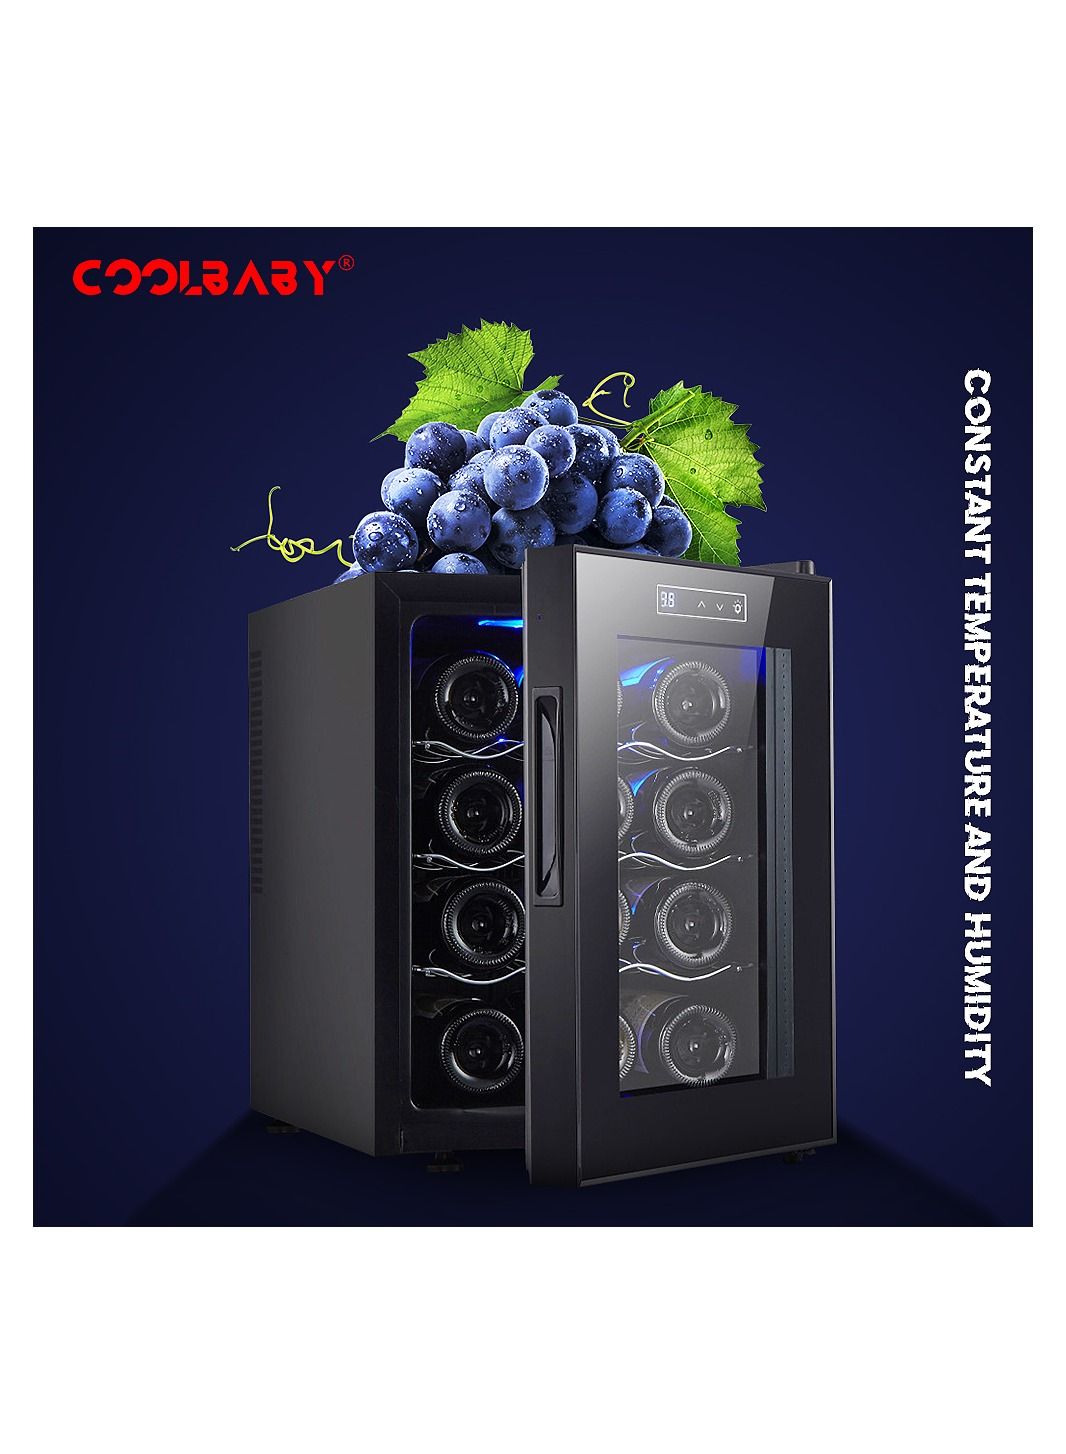 COOLBABY 12 Bottles of Constant Temperature & Humidity Electronic Beverage Wine Cooler Freestanding Compact Mini Wine Fridge Cabinet Refrigerator 